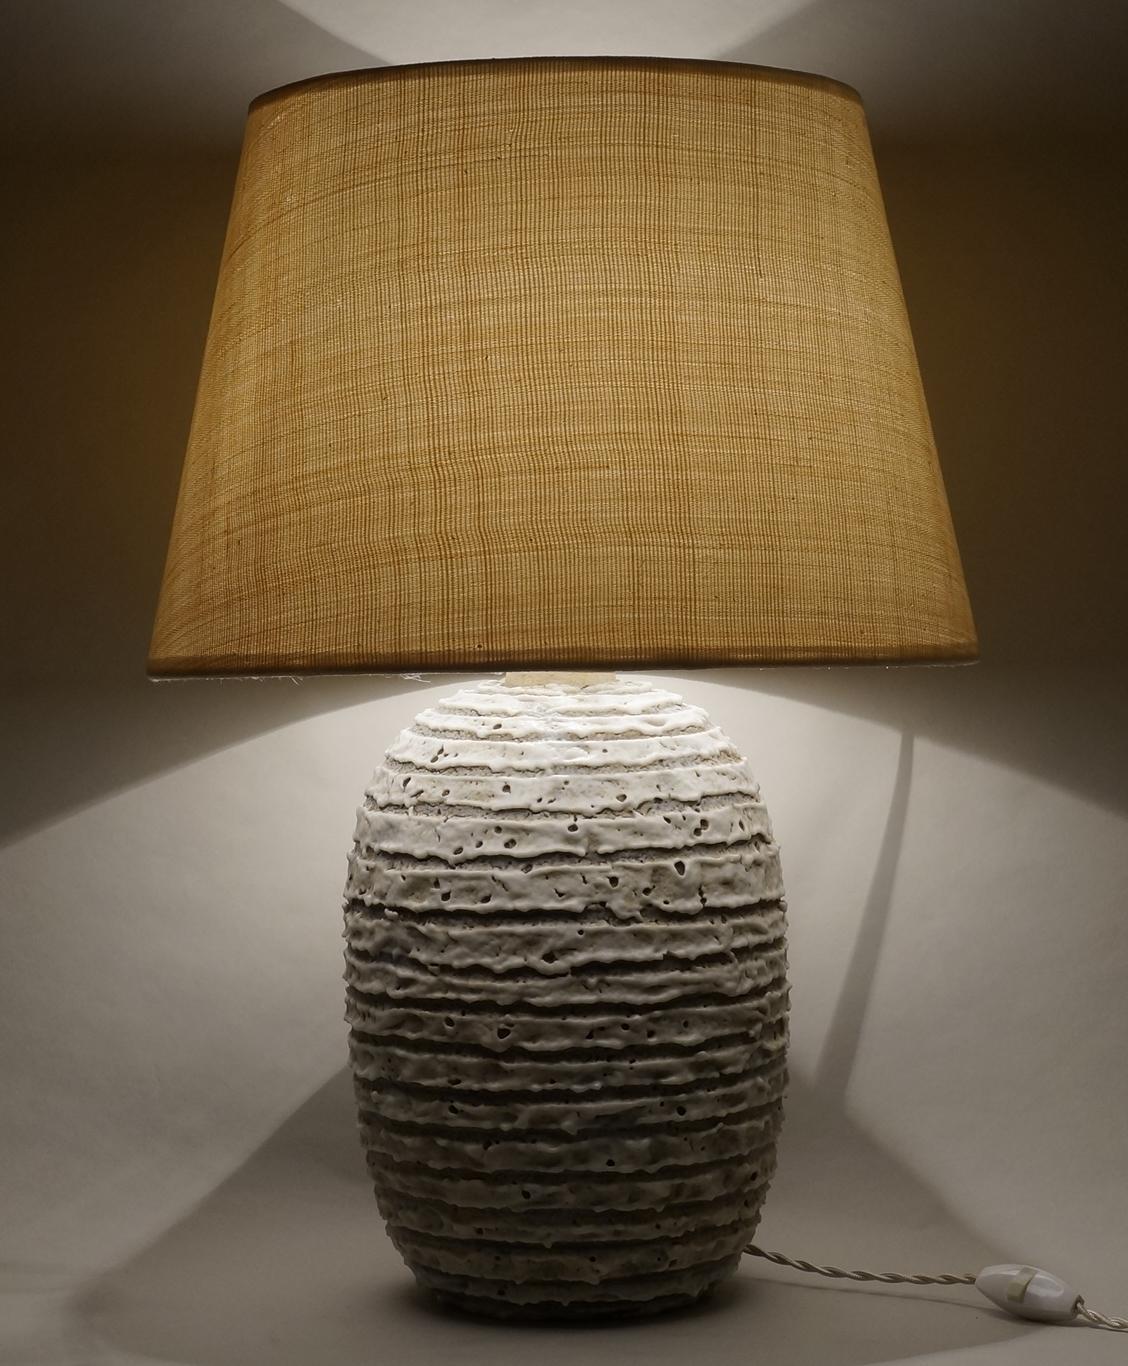 Ethnic white ceramic table lamp with scarification
custom made fabric lampshade in abaca, rewired with twisted silk cord.

Measures: Ceramic body height 30 cm - 11,8in.
Height with lampshade 56 cm - 22in.